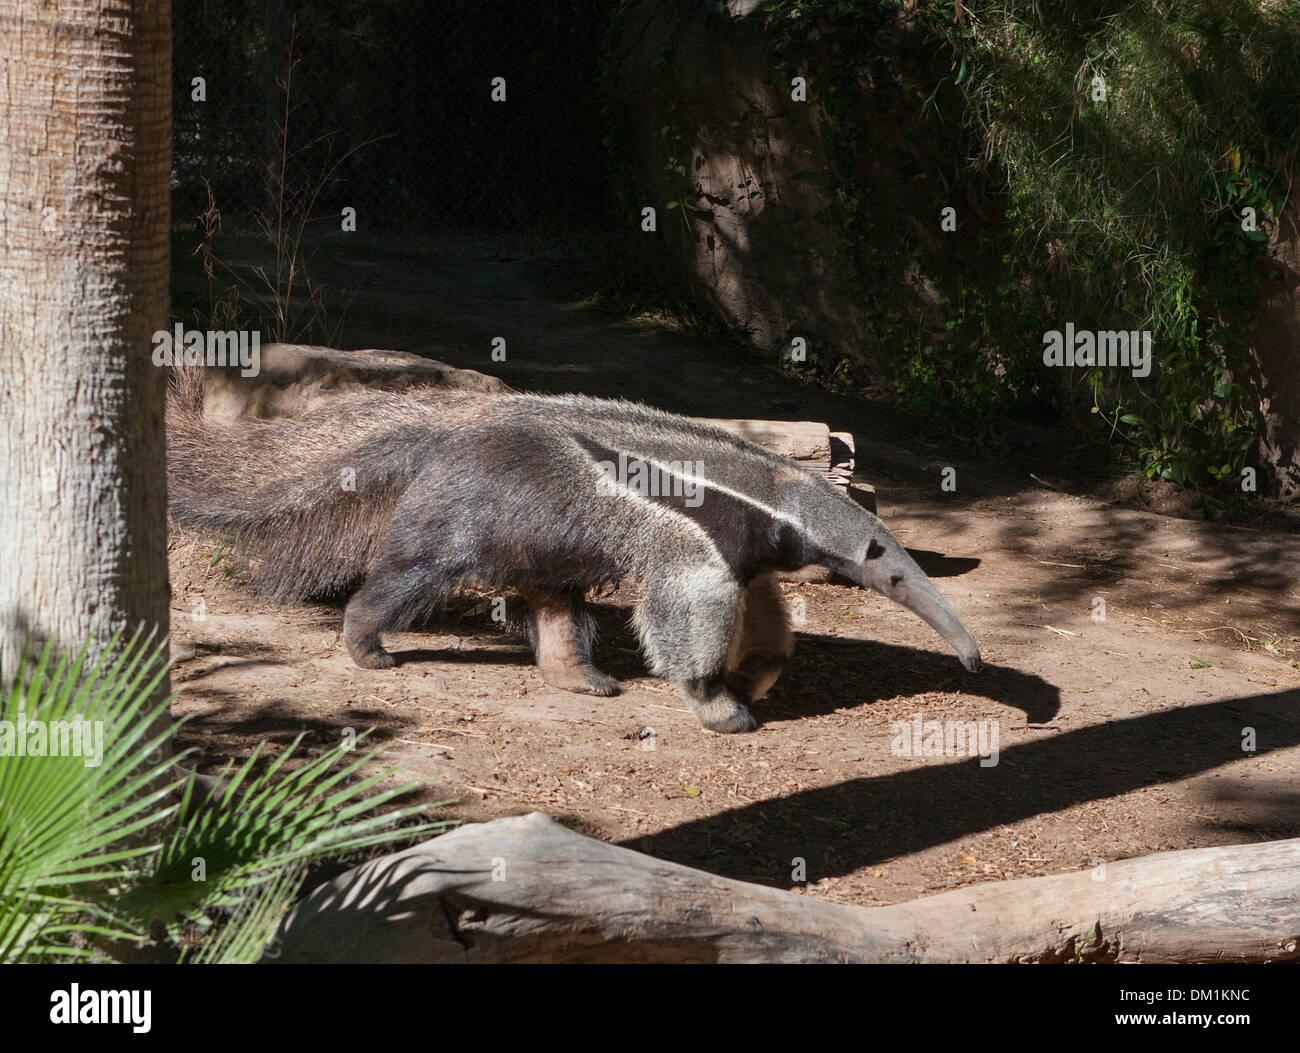 Giant anteater (Myrmecophaga tridactyla), also known as the ant bear, is a large insectivorous mammal. Stock Photo